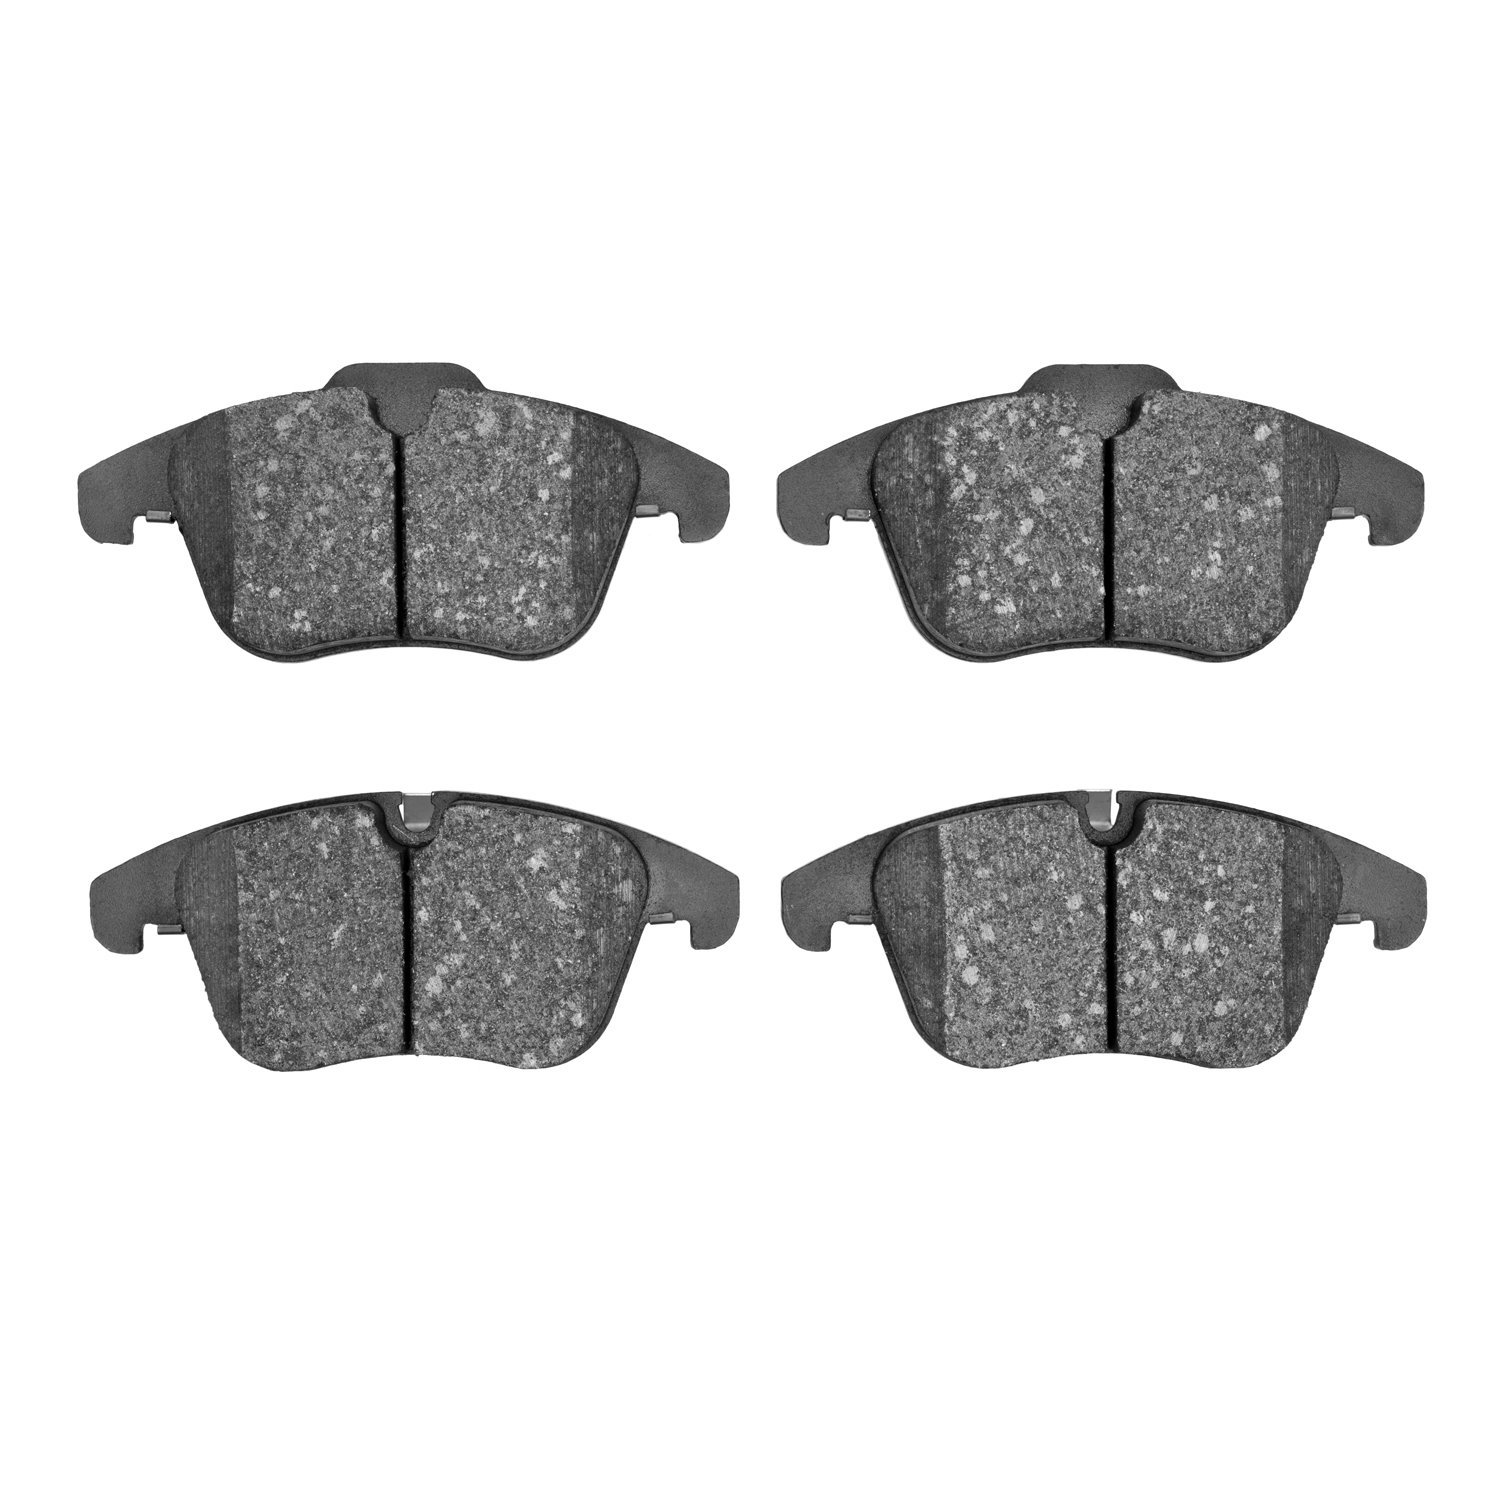 1551-1241-00 5000 Advanced Low-Metallic Brake Pads, 2006-2018 Multiple Makes/Models, Position: Front